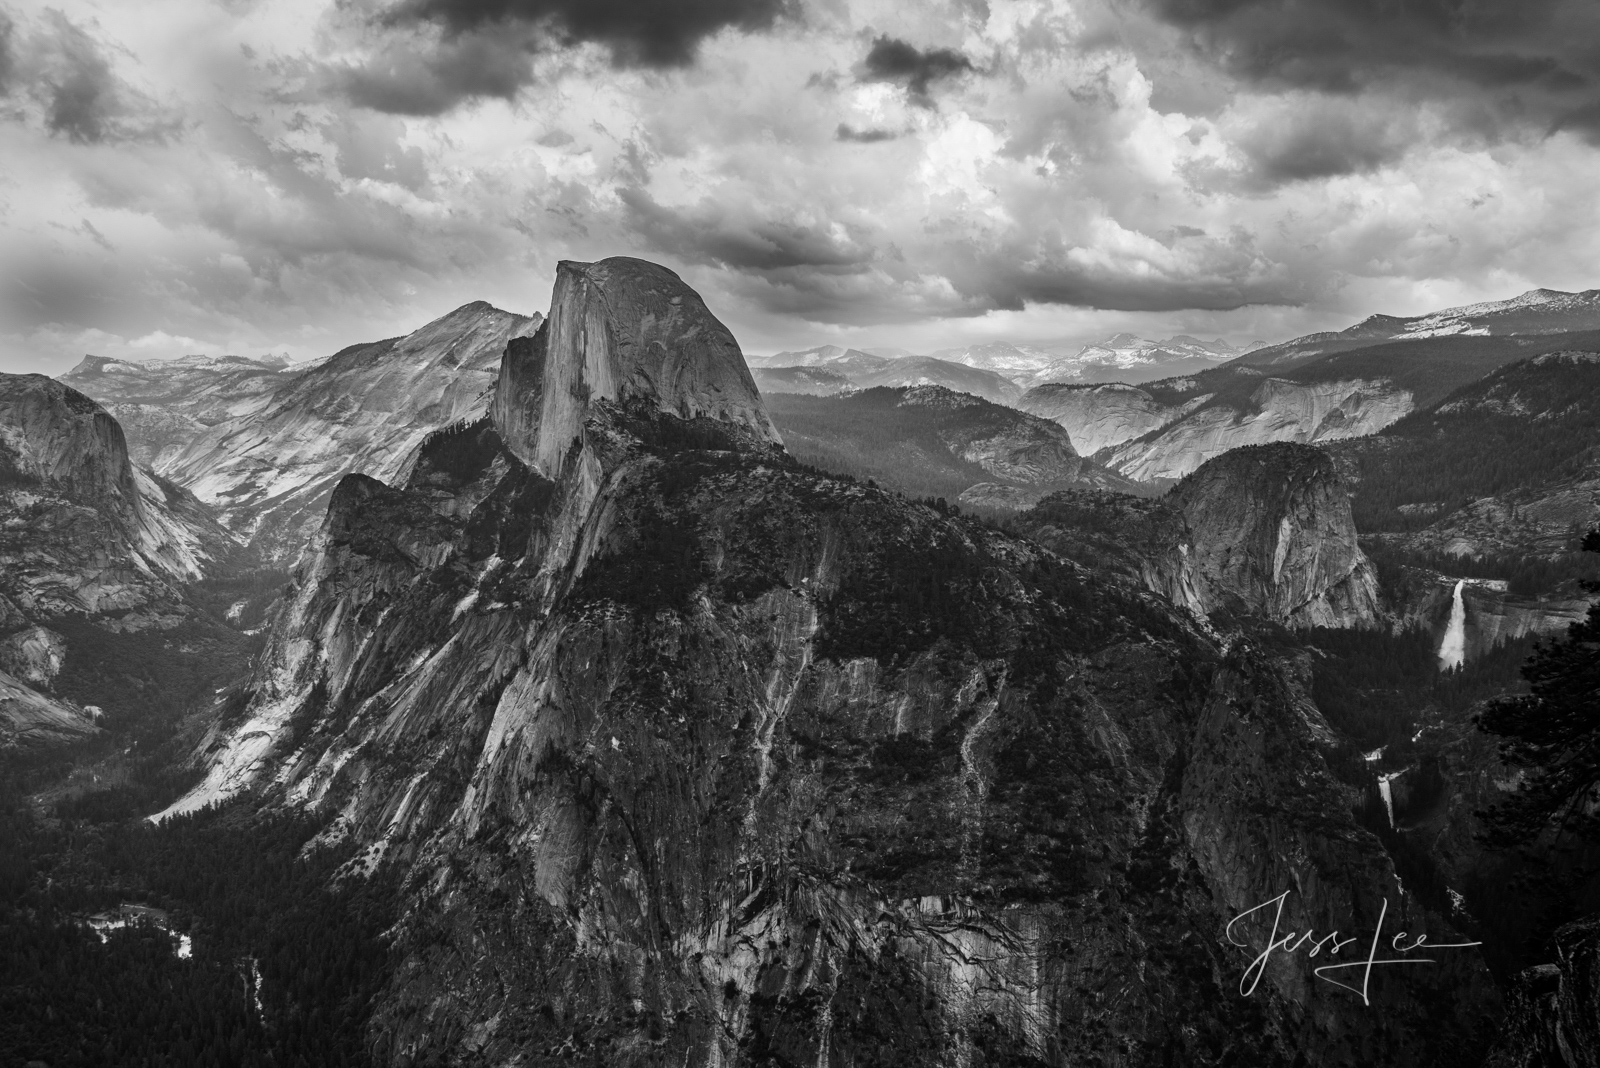 Yosemite Photography Black and White Print of Vernal Falls, Nevada Falls, and Half Dome. A limited to 200 fine art high resolution...